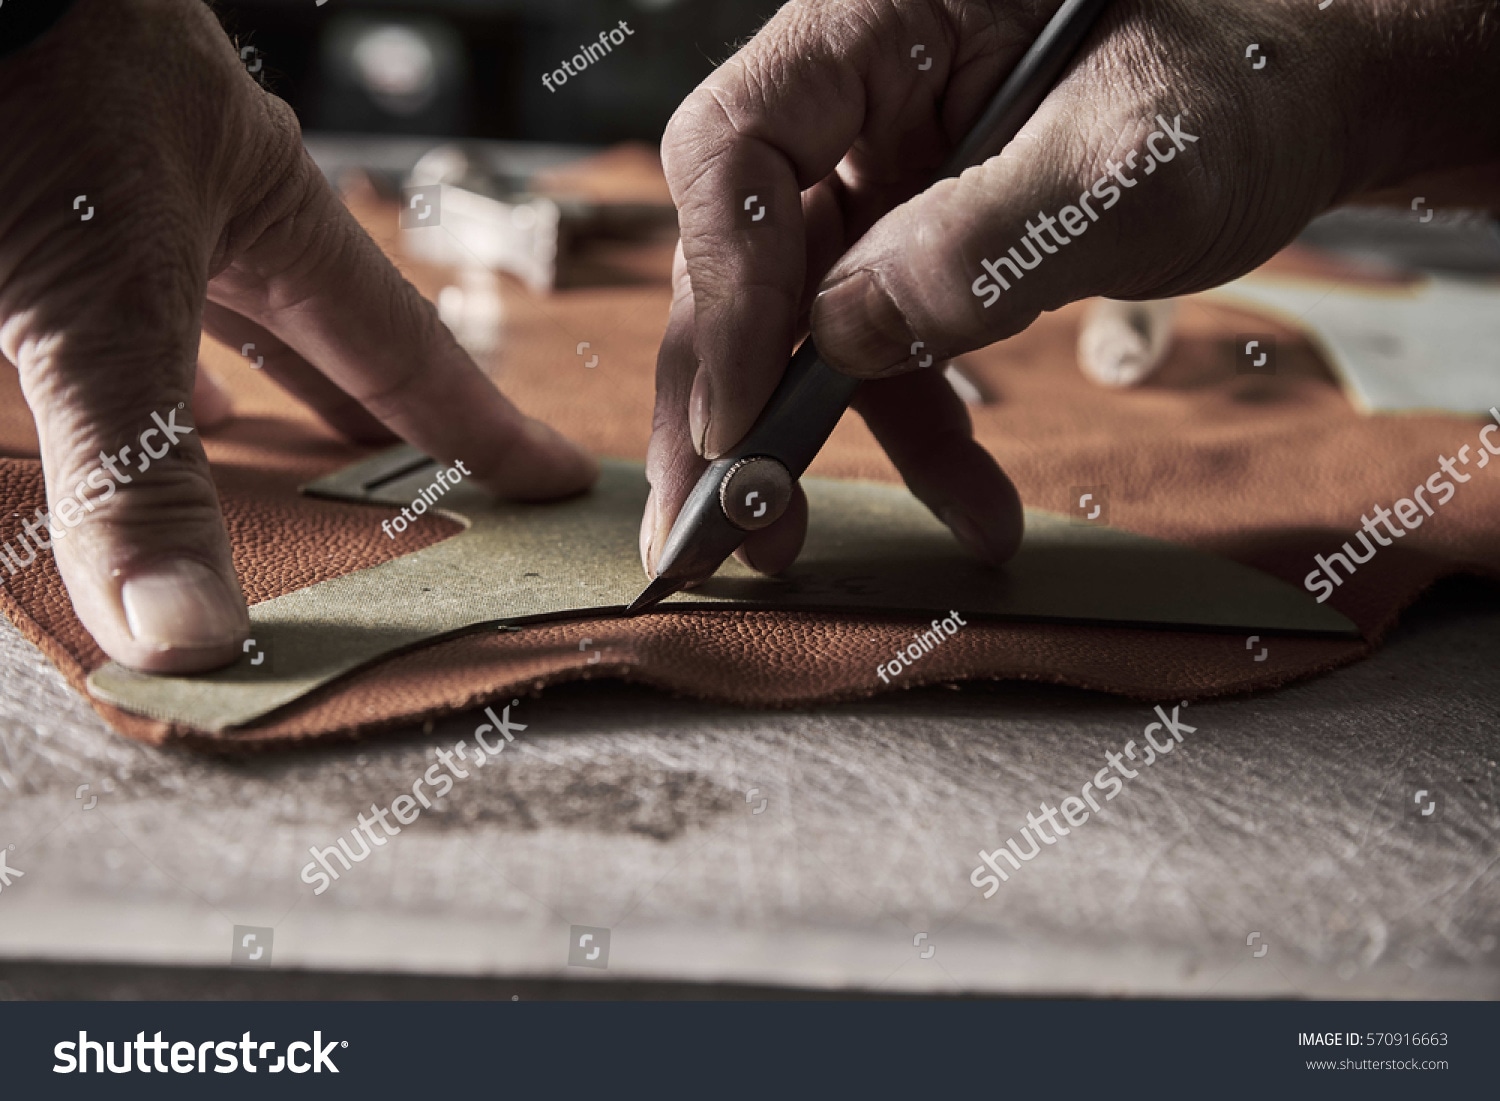 stock-photo-shoe-production-process-in-factory-570916663.jpg